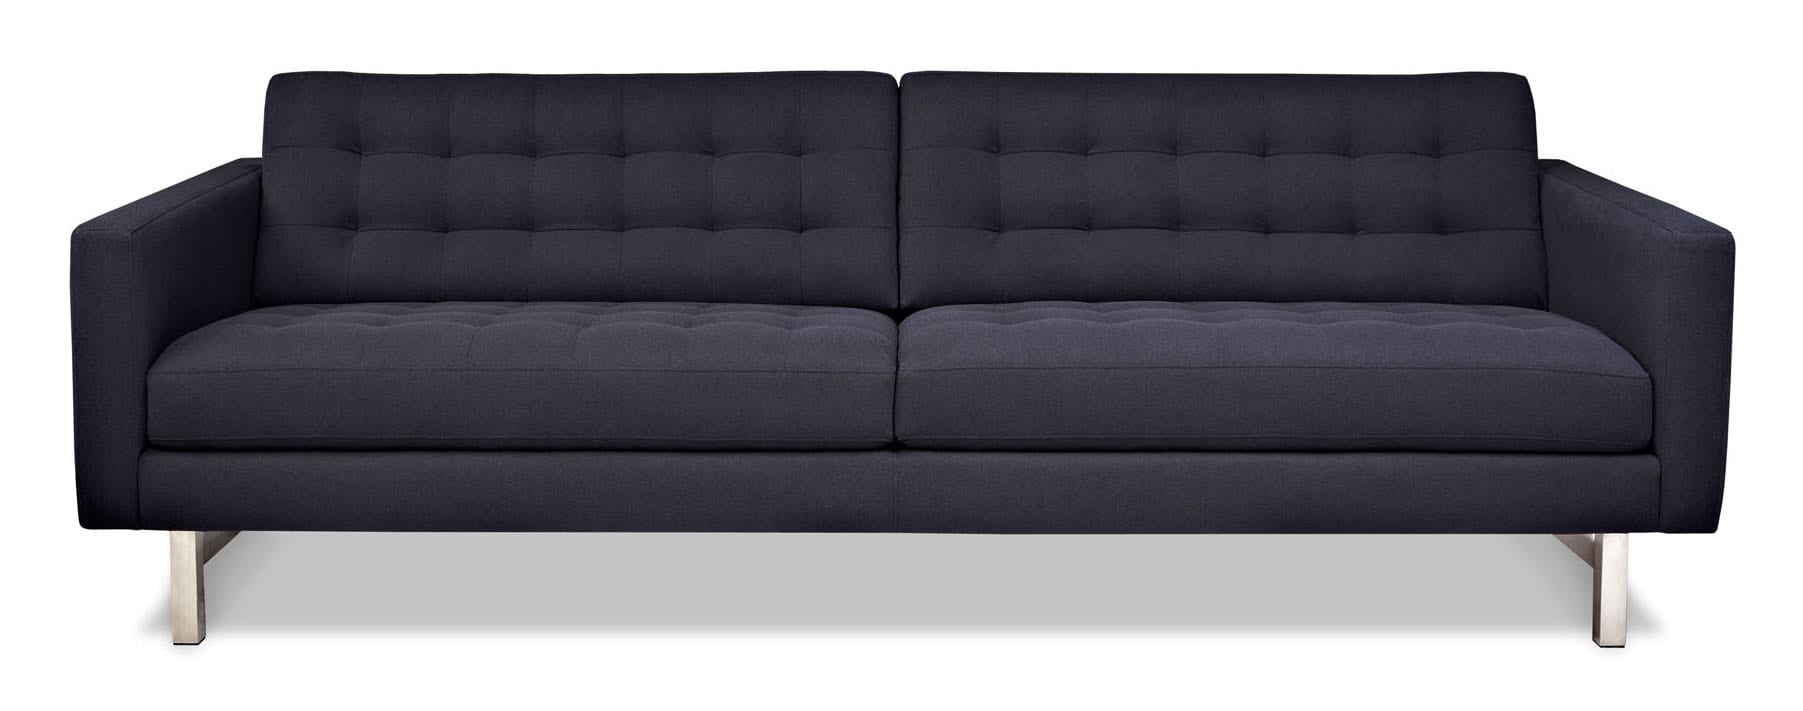 american leather parker sofa